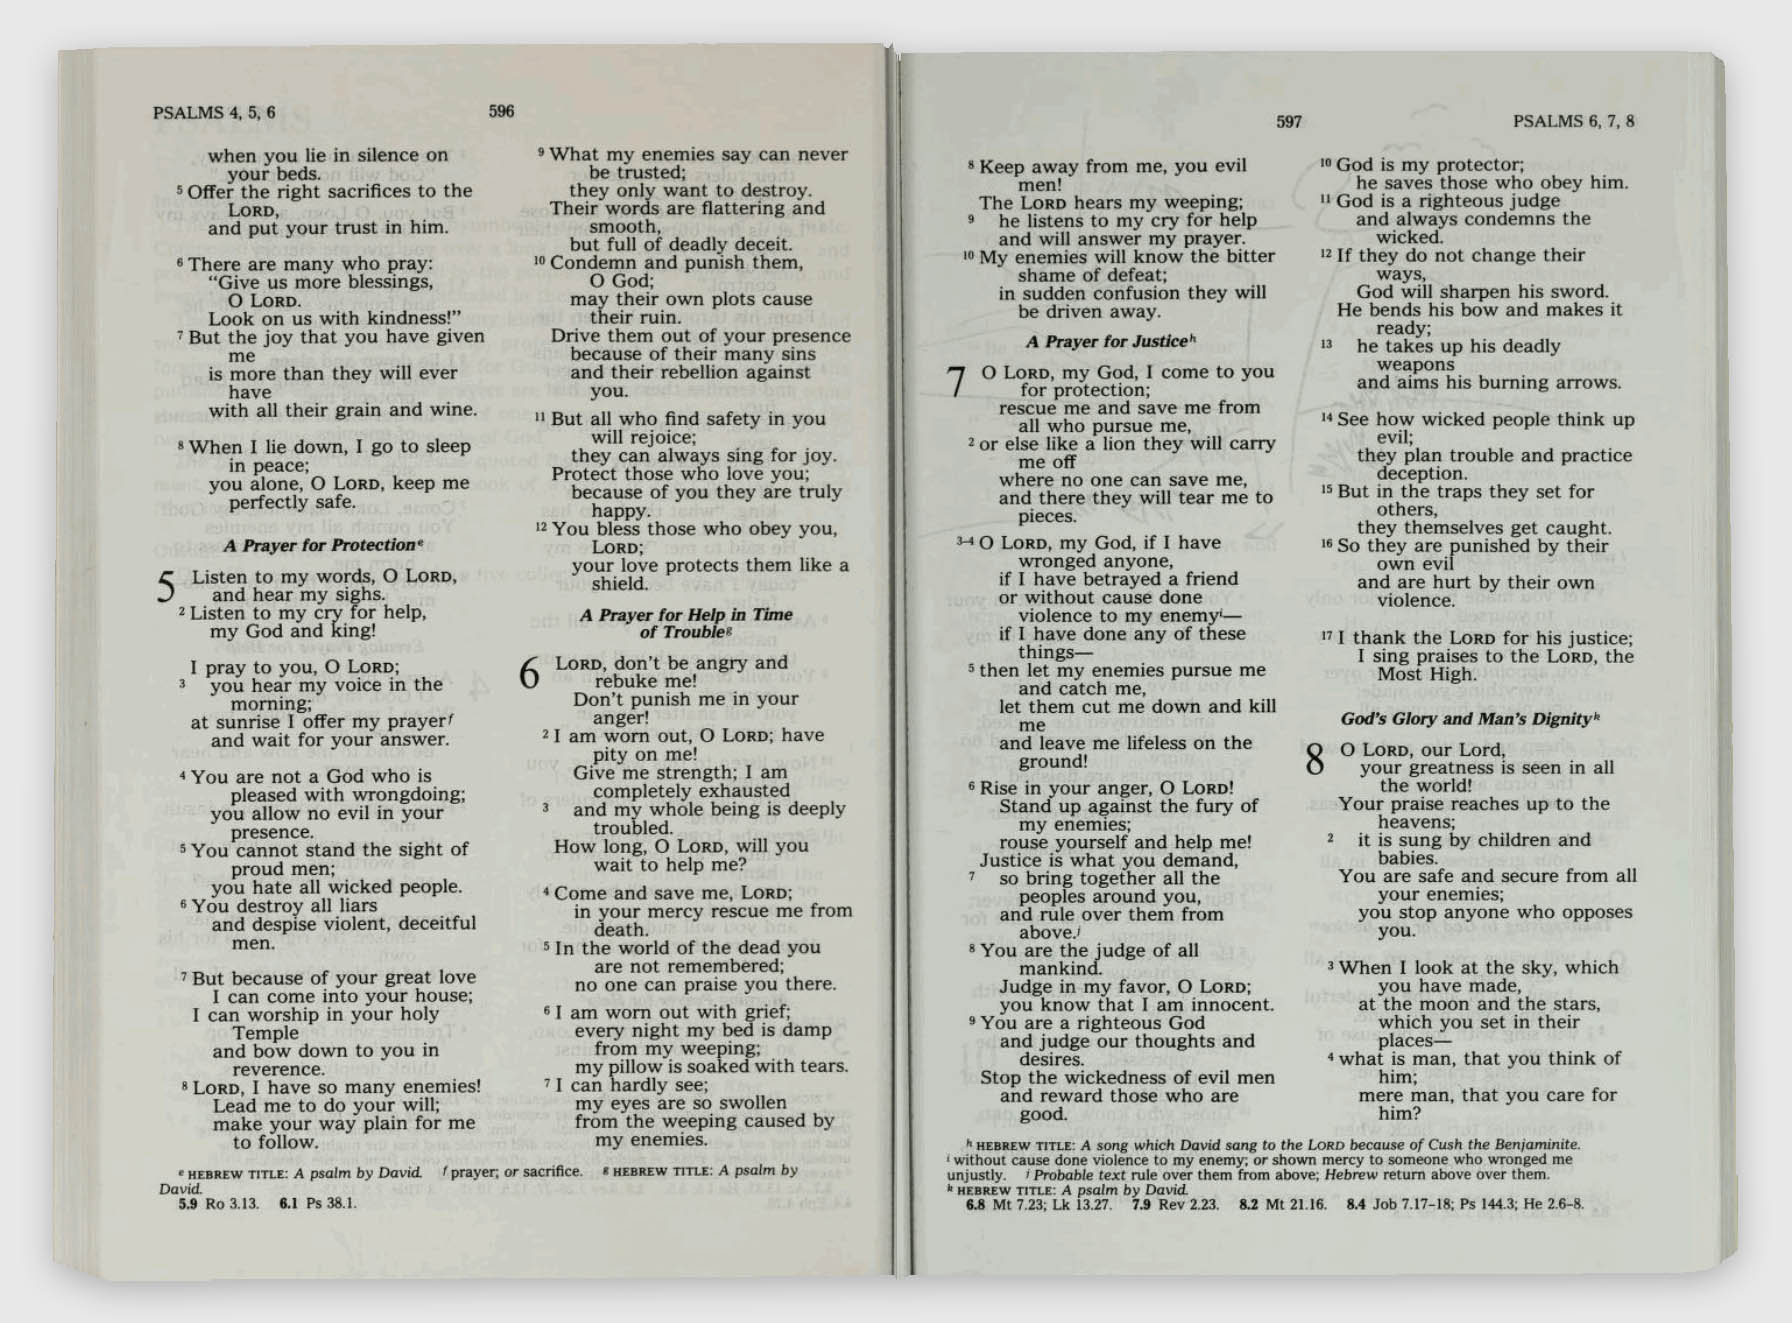 Psalm 7 from the Good News Bible published by the American Bible Society, 1976.